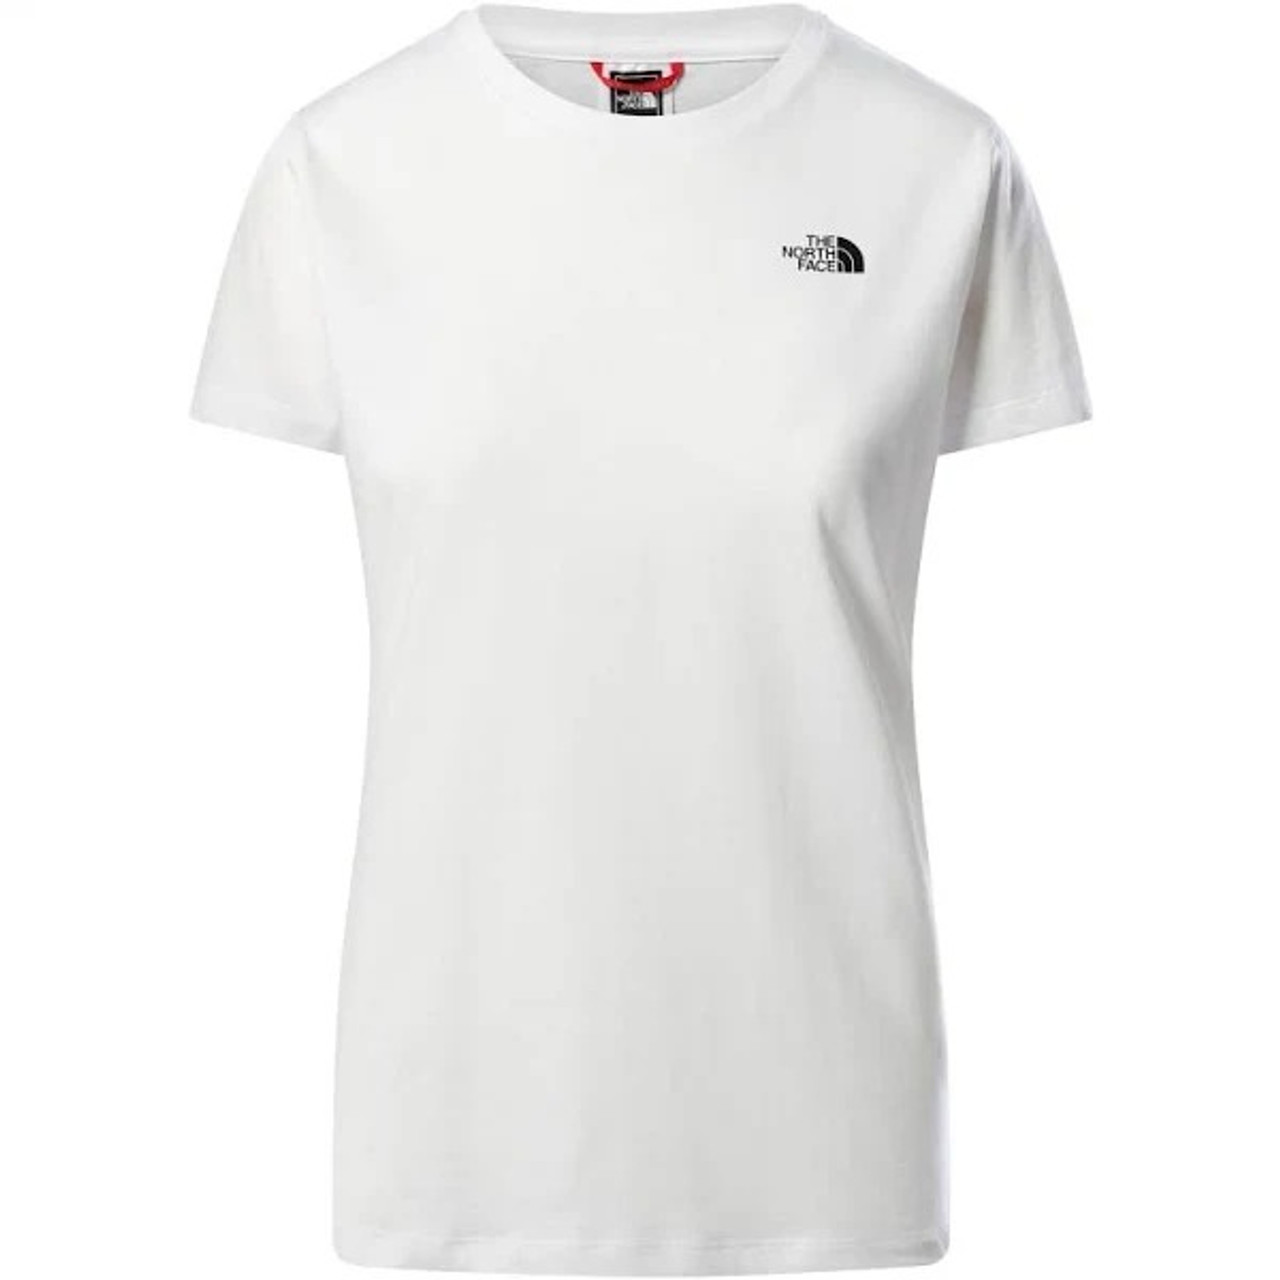 The North Face Short Sleeve White T-shirt THE with in - RACK BEYOND BTR Logo Chest 